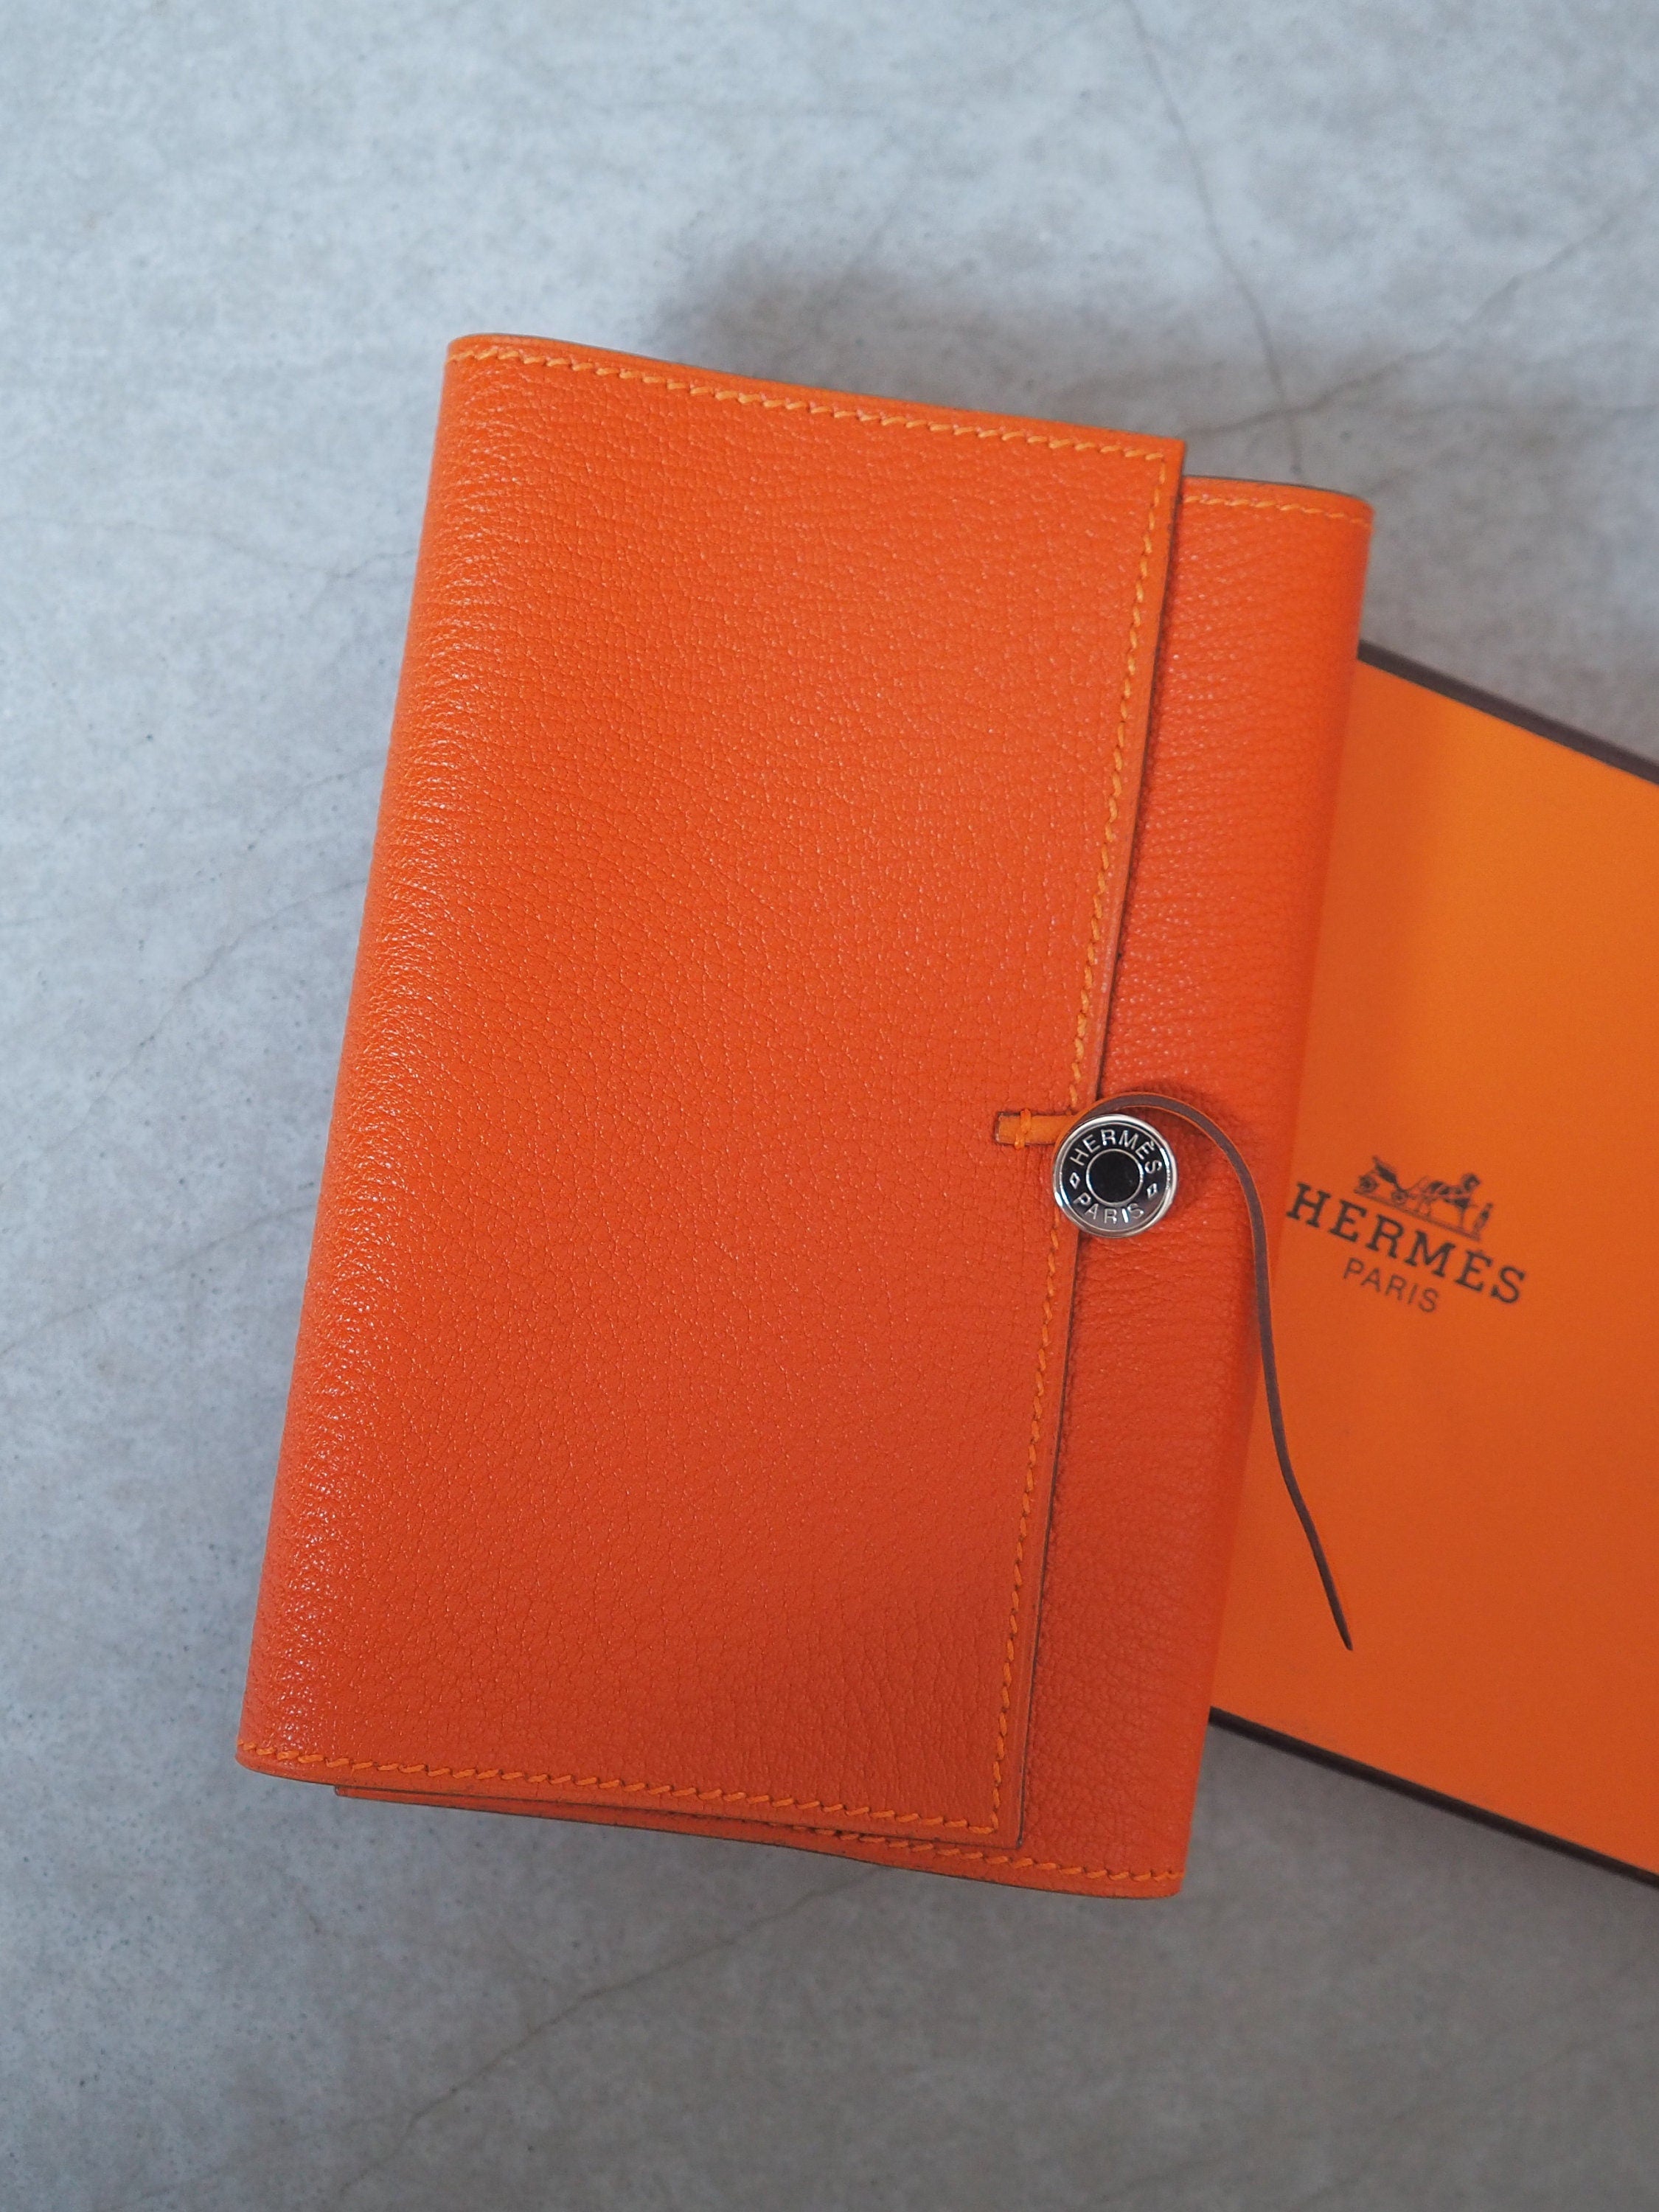 HERMES Book Cover Serie Orange Leather Vintage Authentic